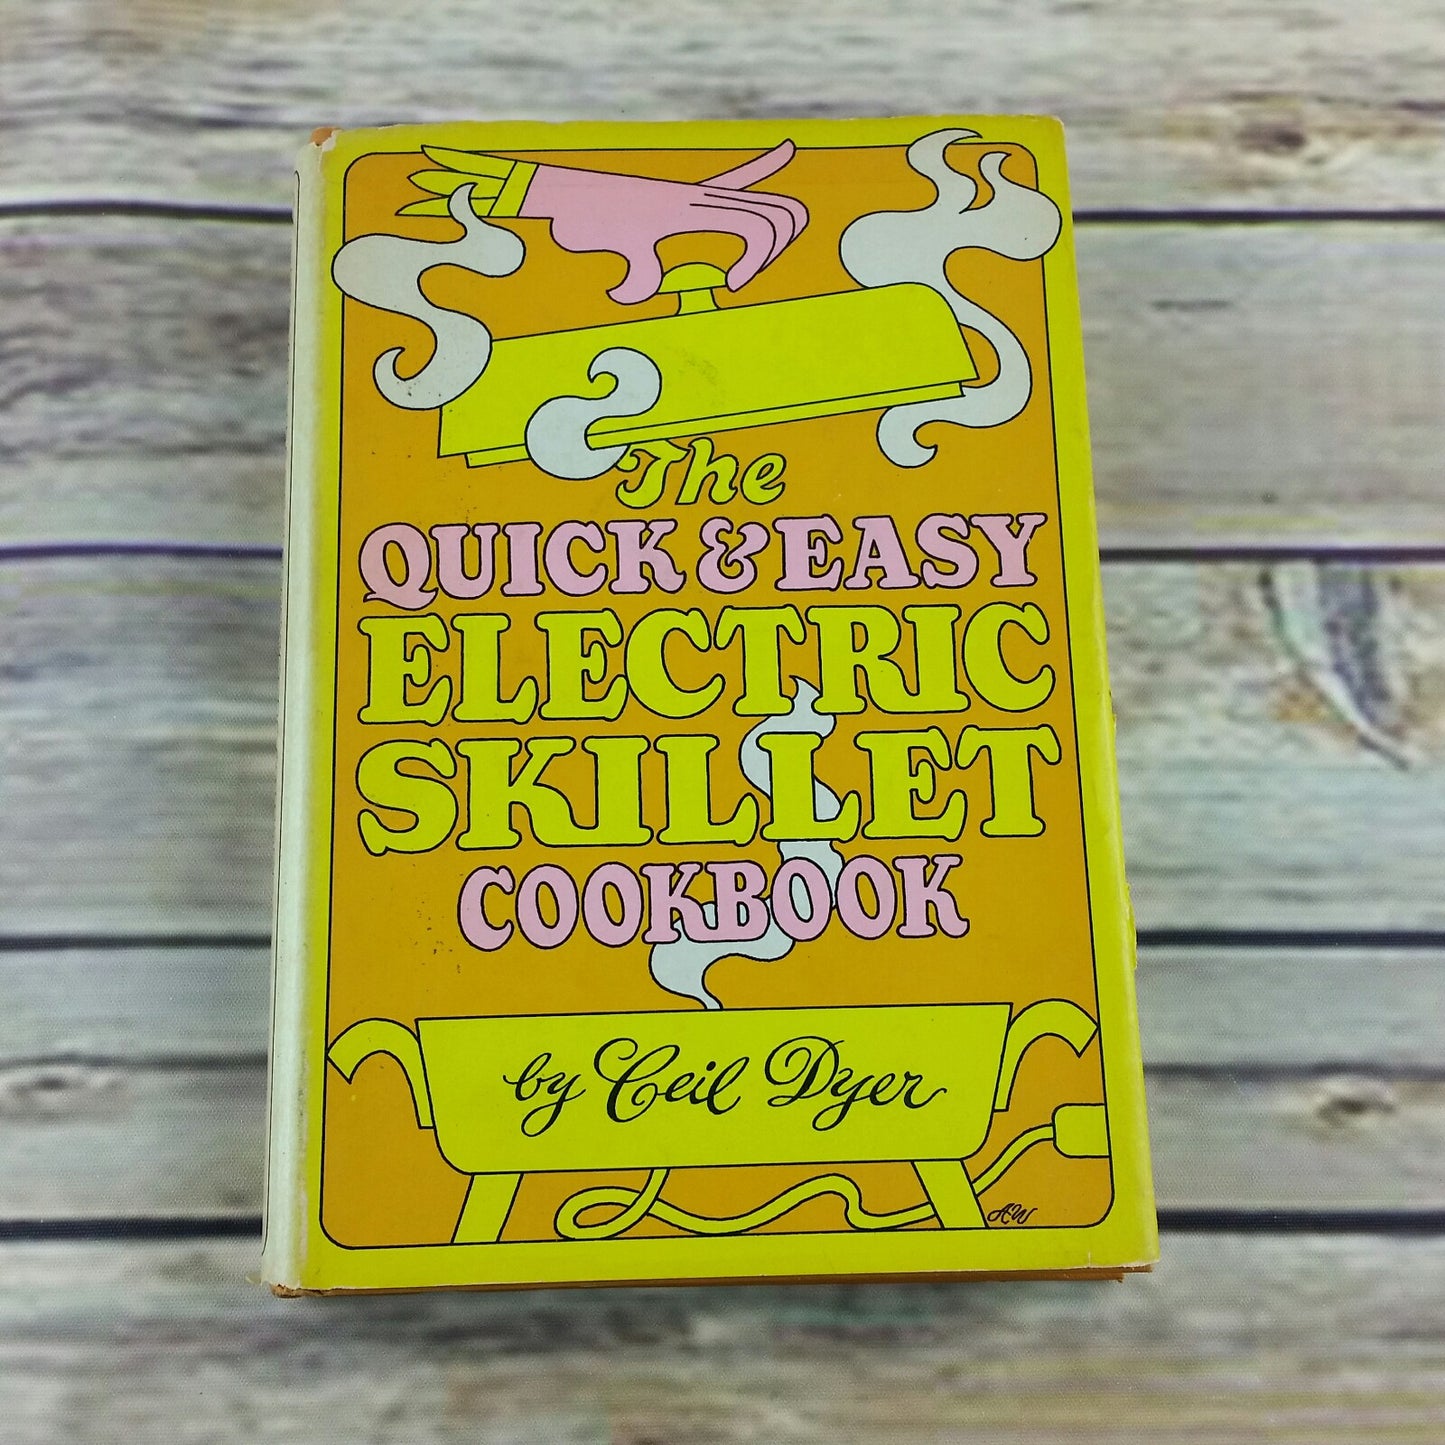 Vintage Cookbook Quick and Easy Electric Skillet Frypan Frying Fry Pan Hardcover 1969 Ceil Dyer with Dust Jacket - At Grandma's Table